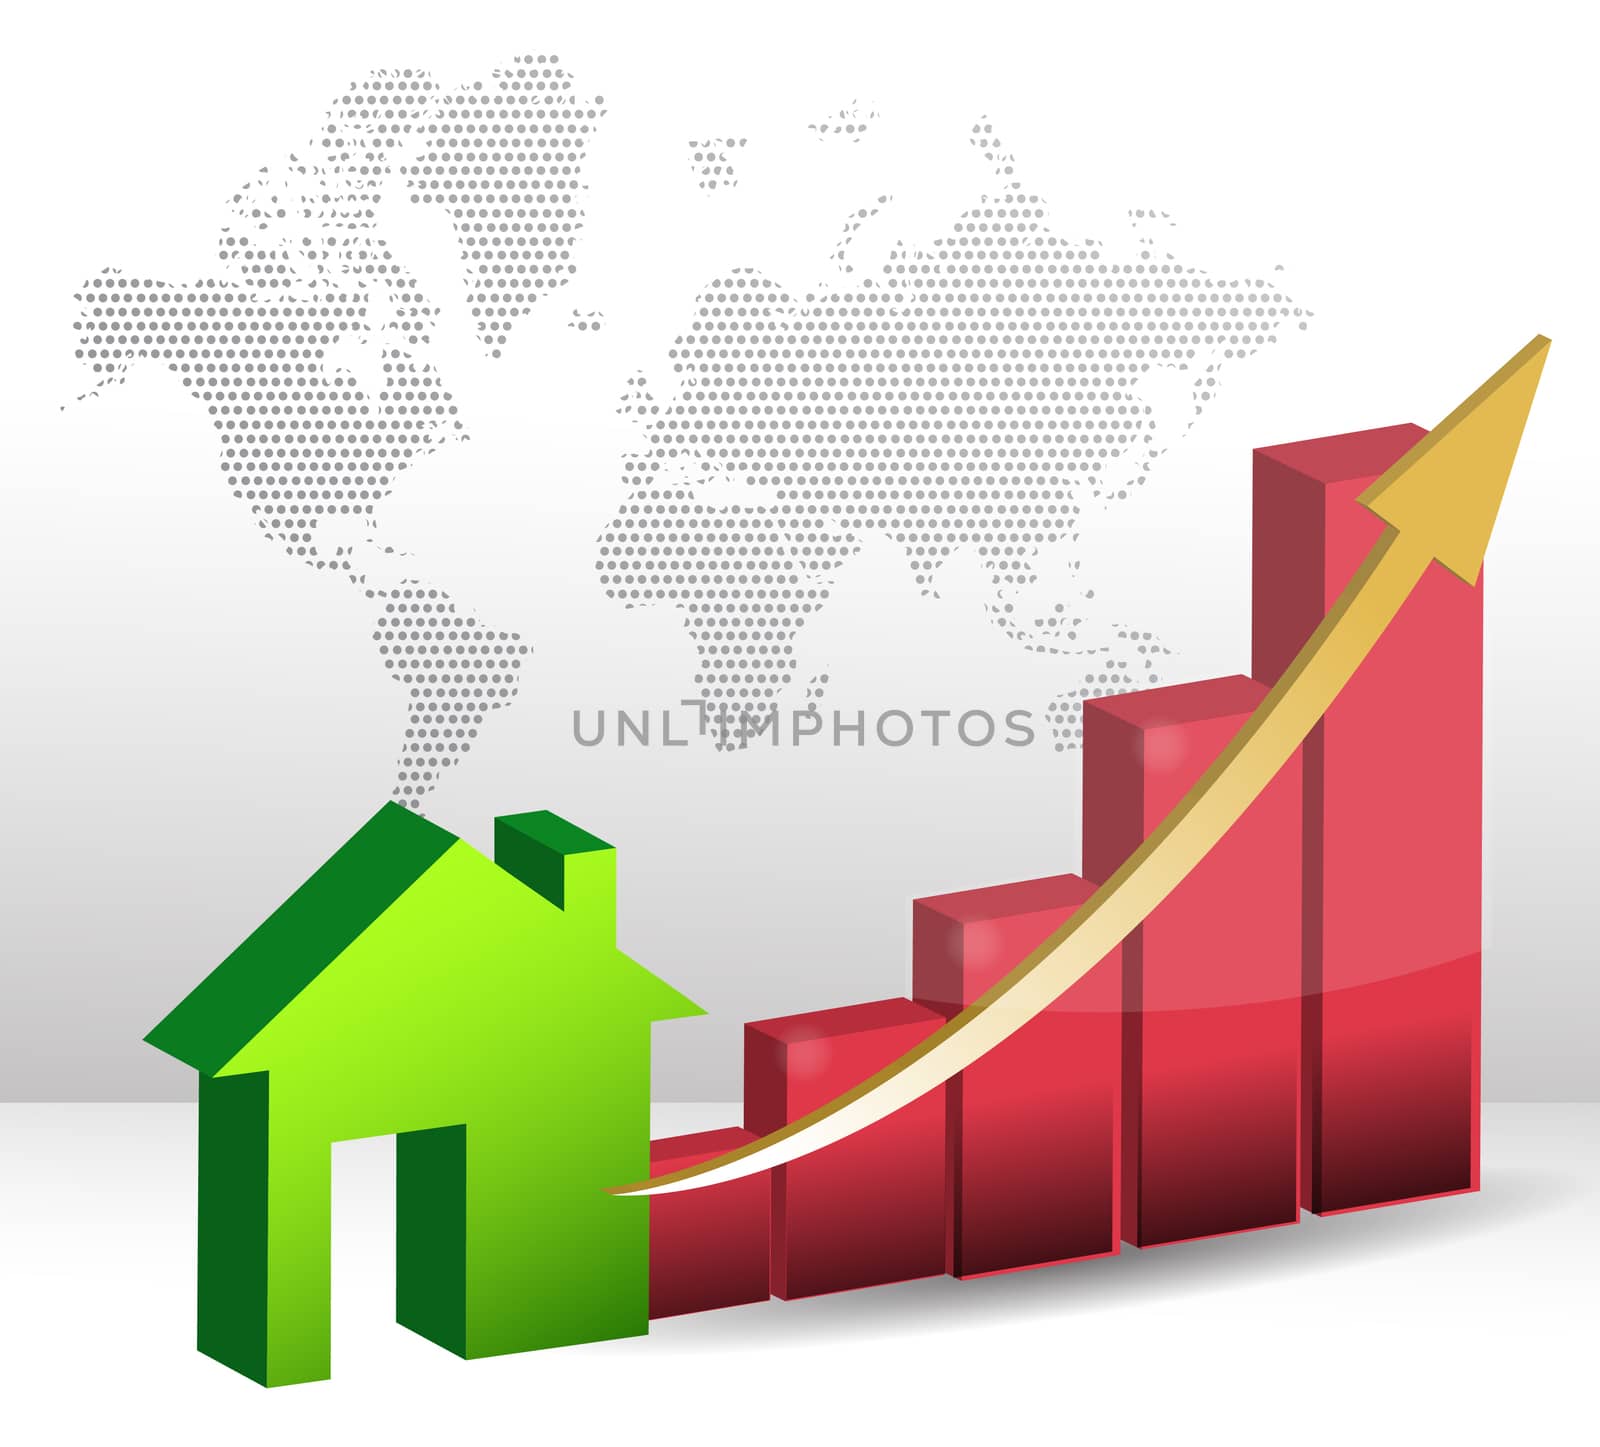 Housing market business charts with green house